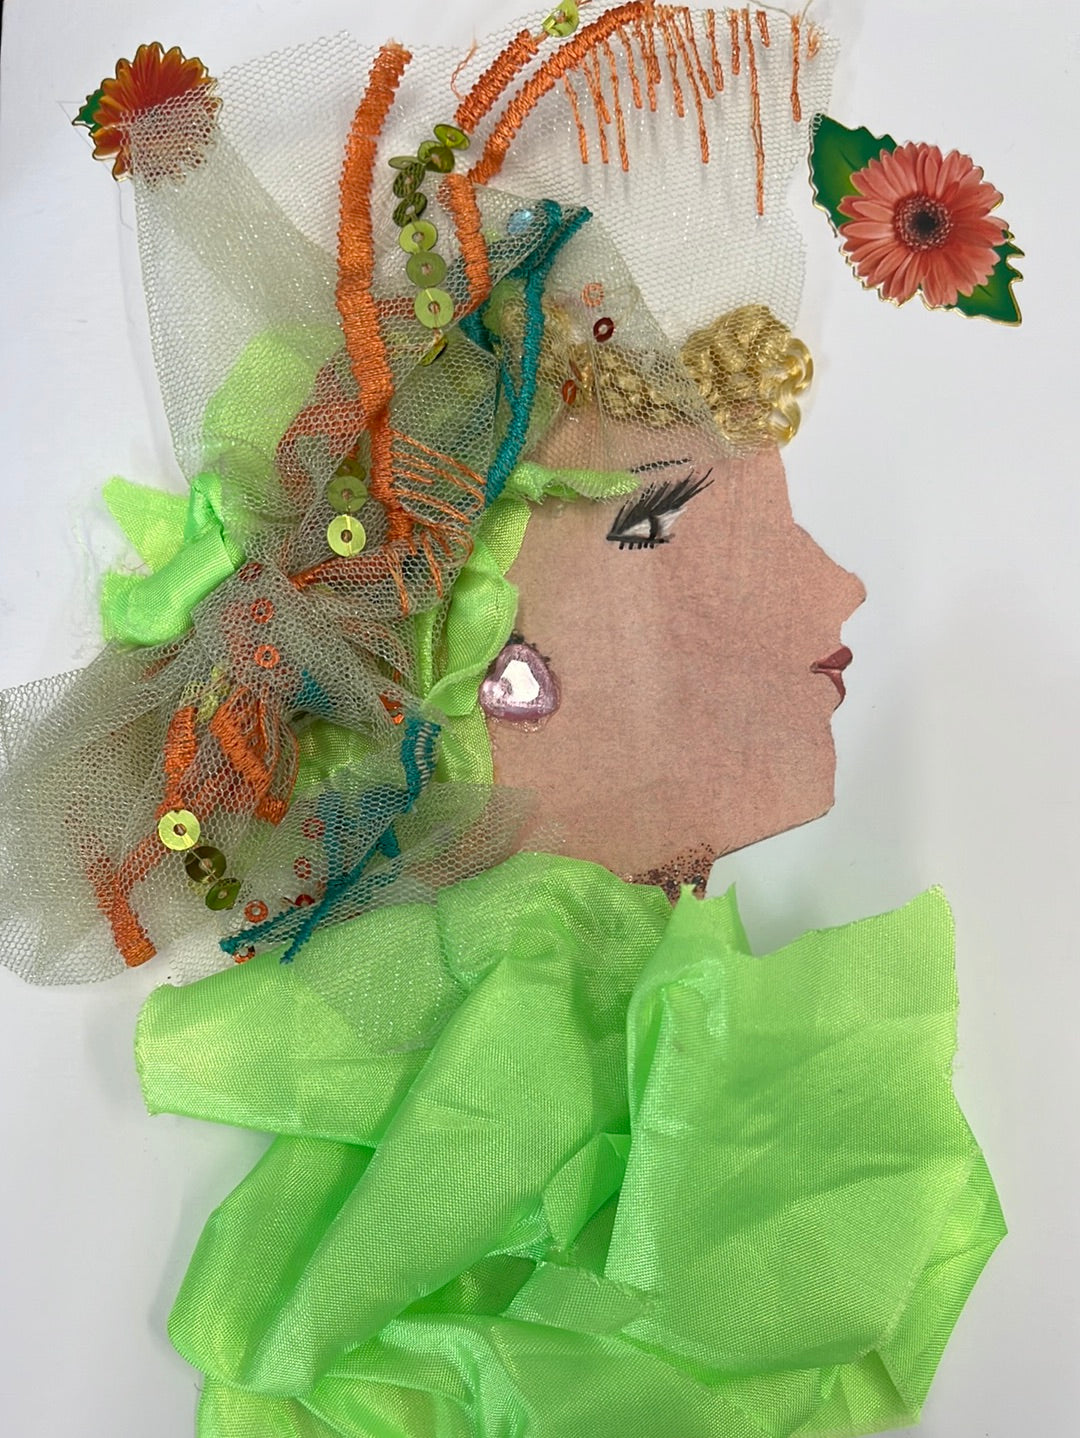 This card was given the name Meredith Grimsgate. She wears an electric green silky blouse, which match the material in her curly blonde hair. She also wears a sequin fabric headscarf which has orange accents. In the left and right corners, there are small orange flowers. 